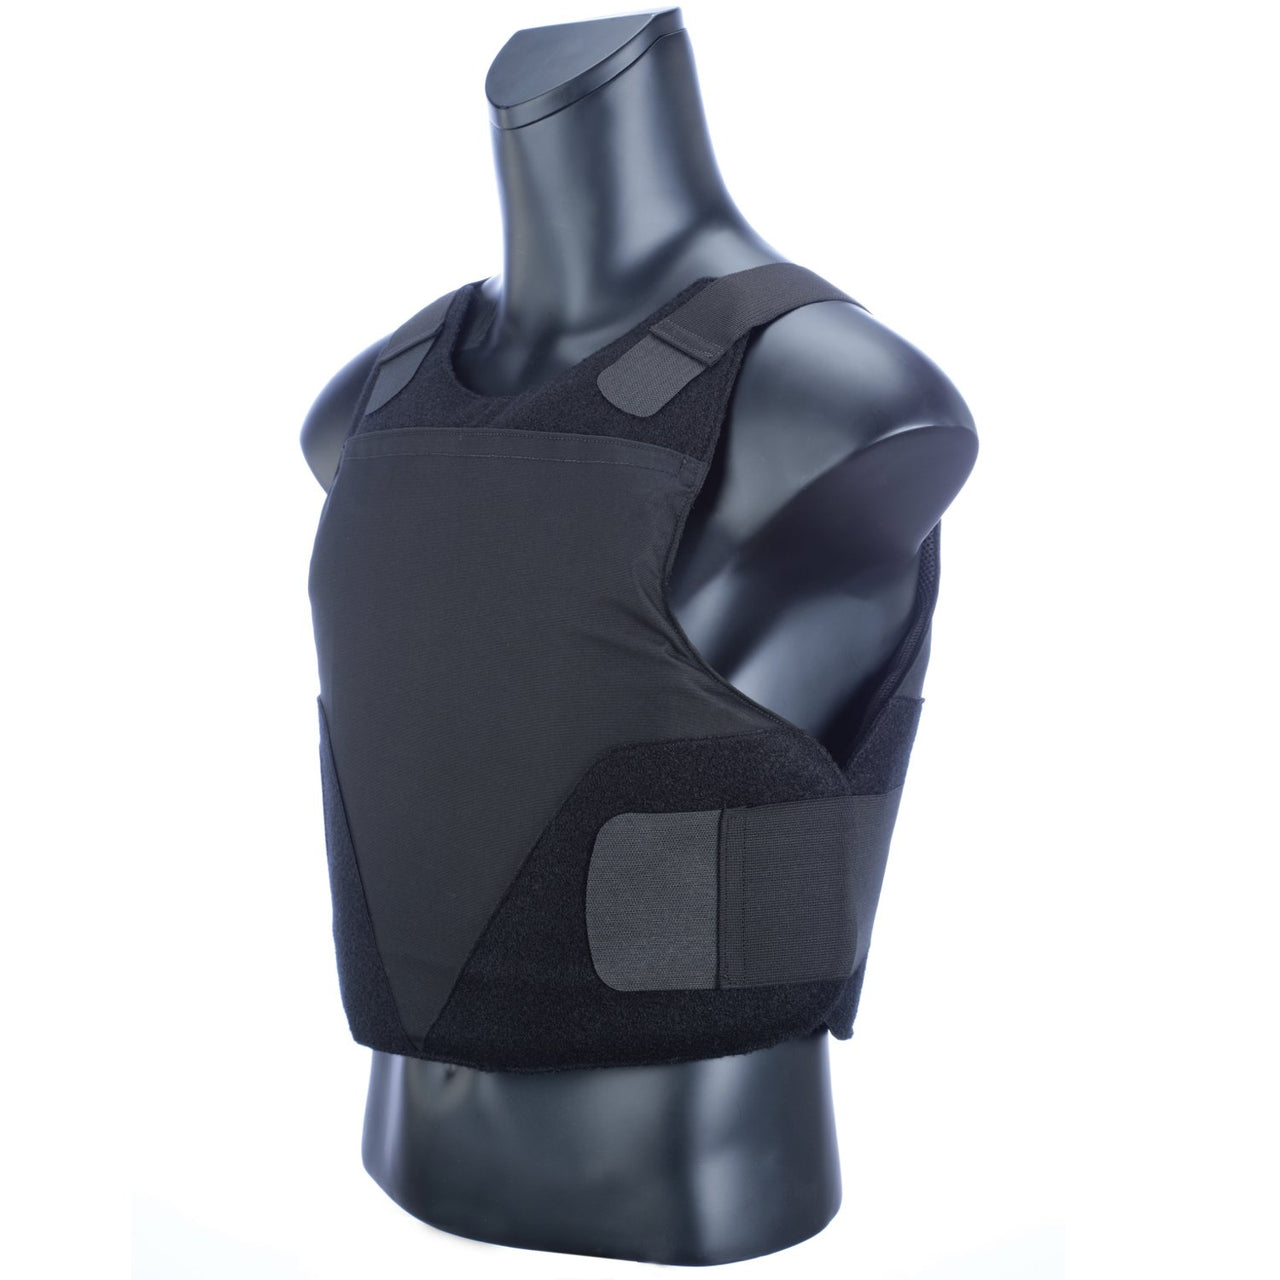 A mannequin wearing a black Body Armor Direct All American Concealable Enhanced Multi-Threat Vest.